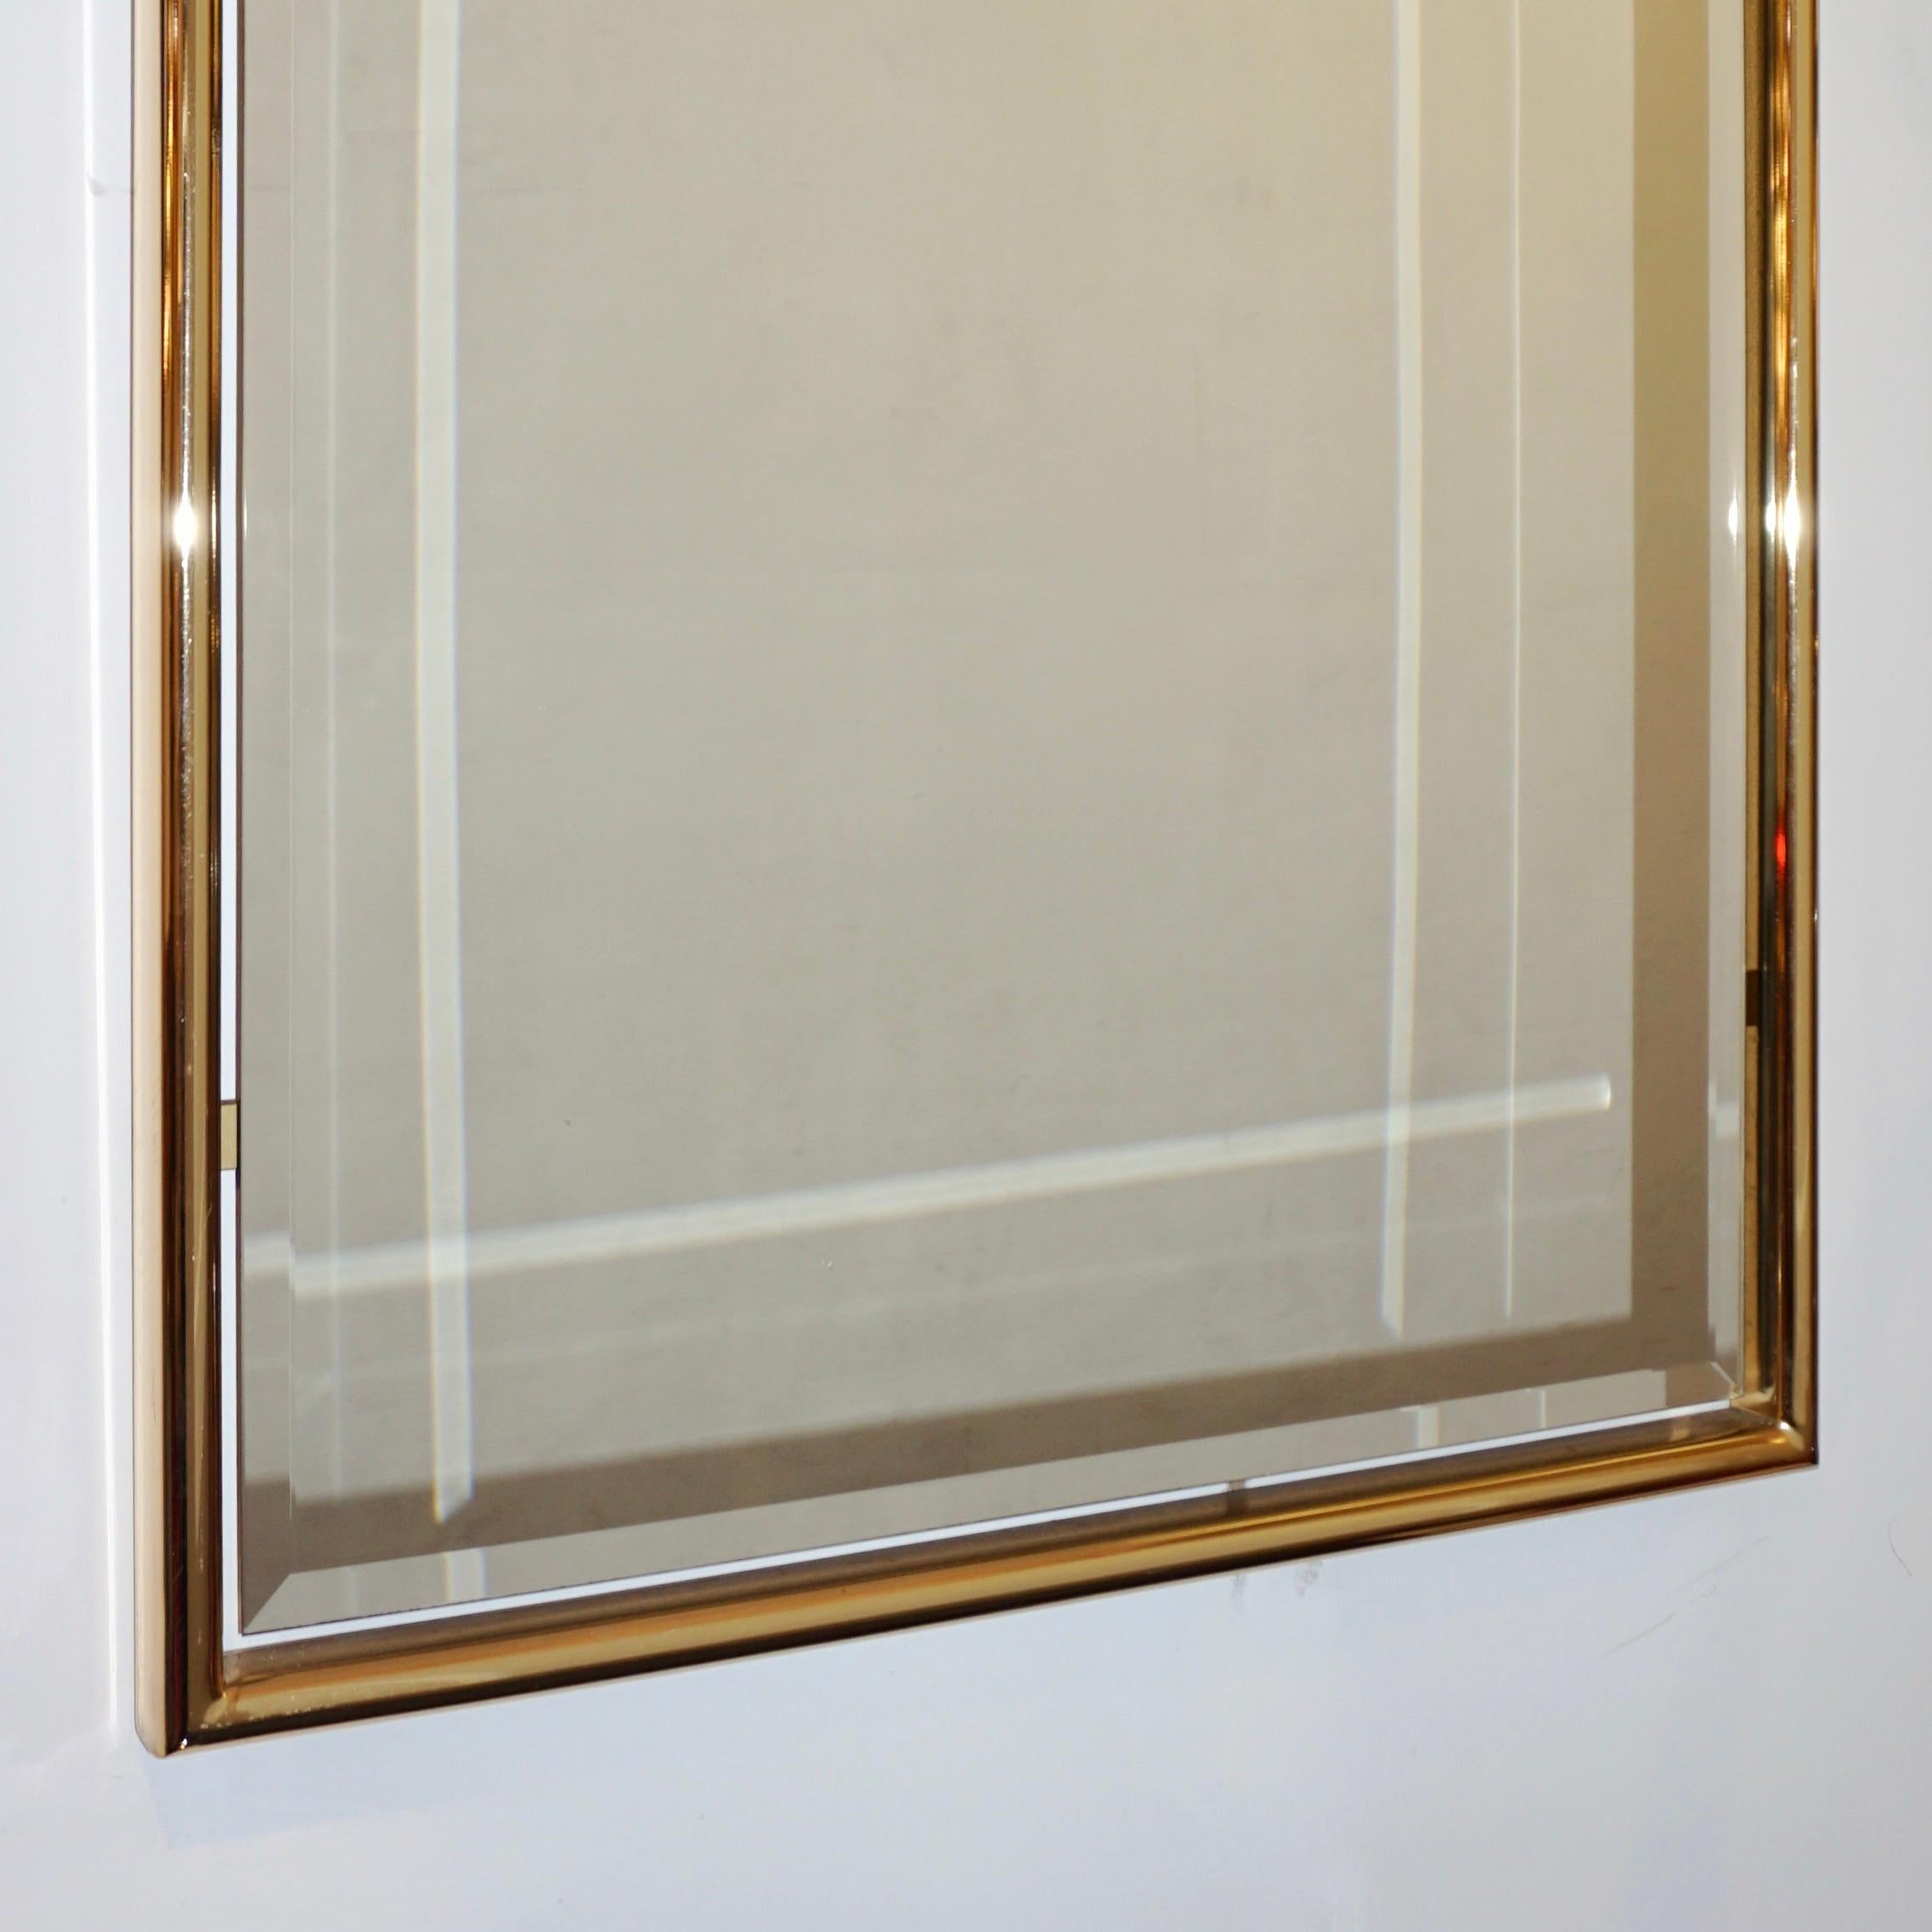 Beveled 1960s Italian Minimalist Brass Floating Mirror with Round Arched Top Frame For Sale